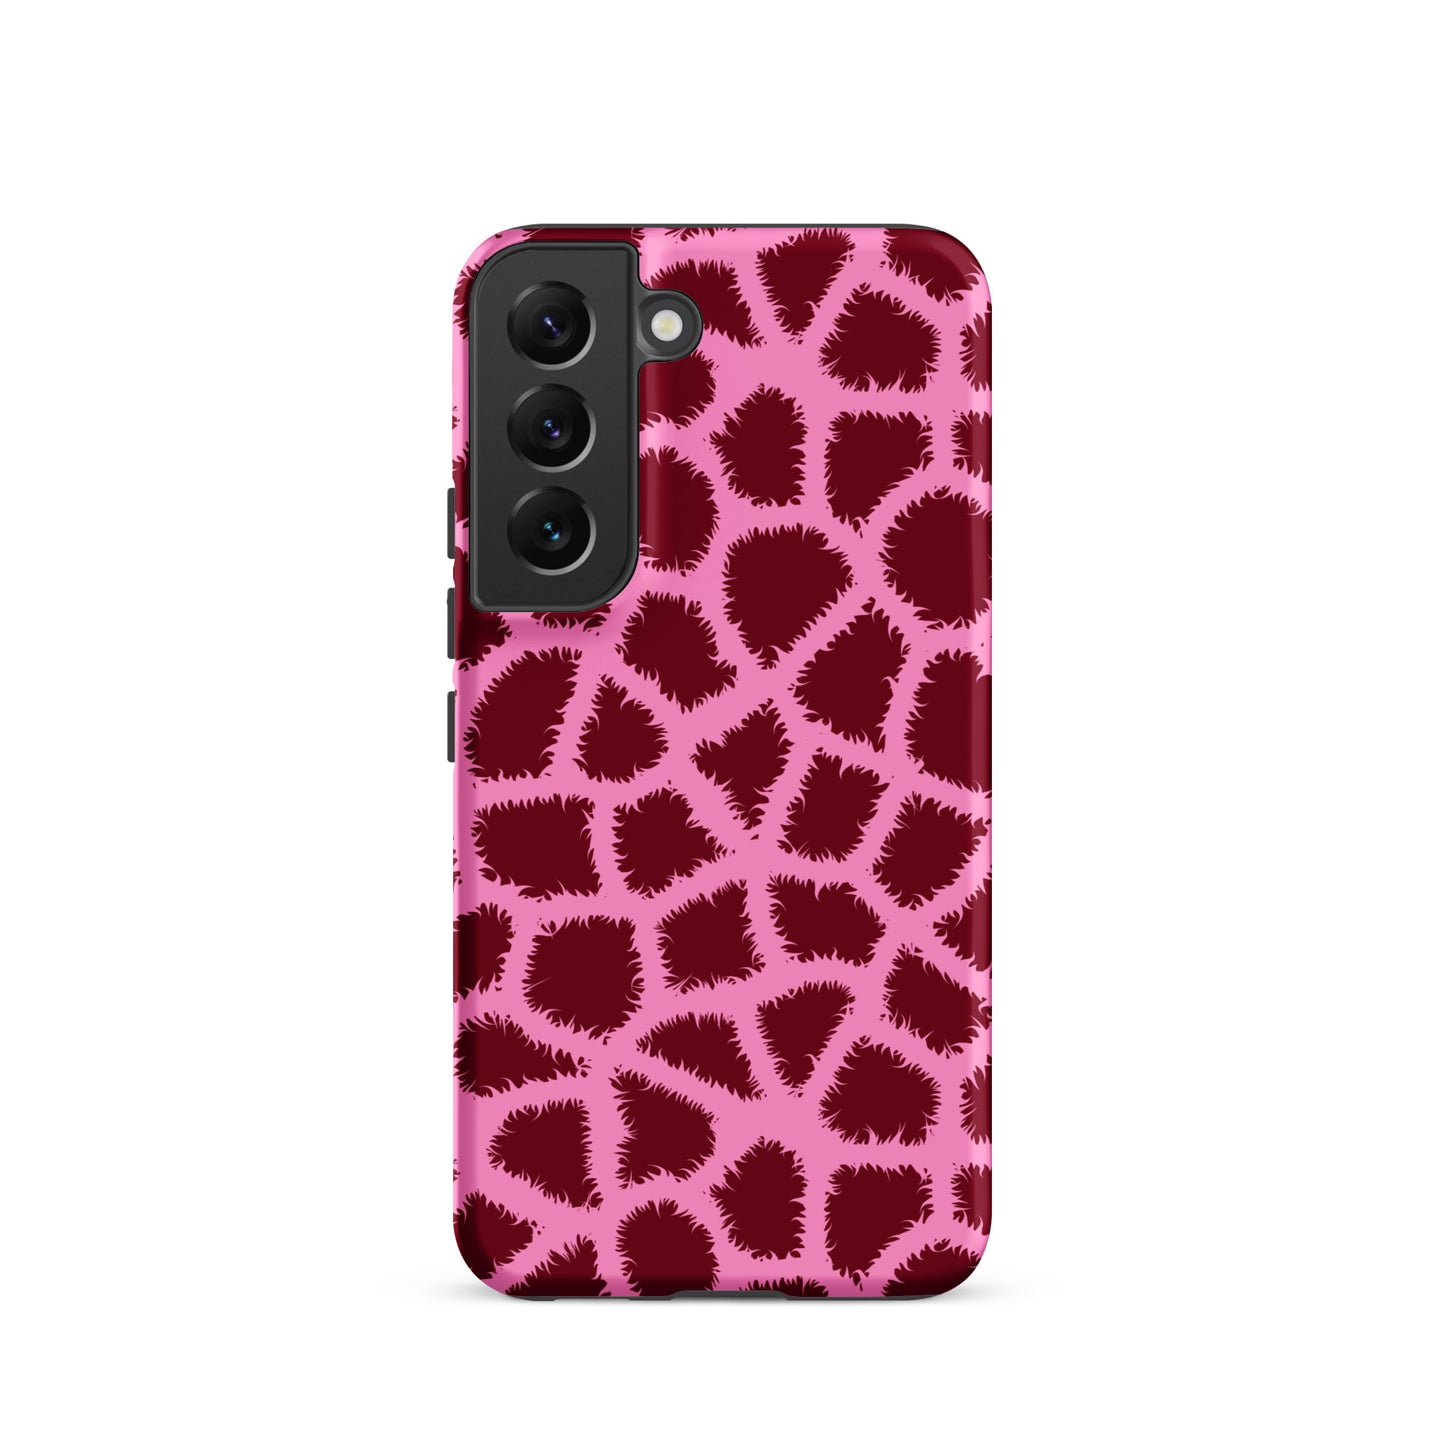 That's a Giraffe of a Different Color Samsung® Case